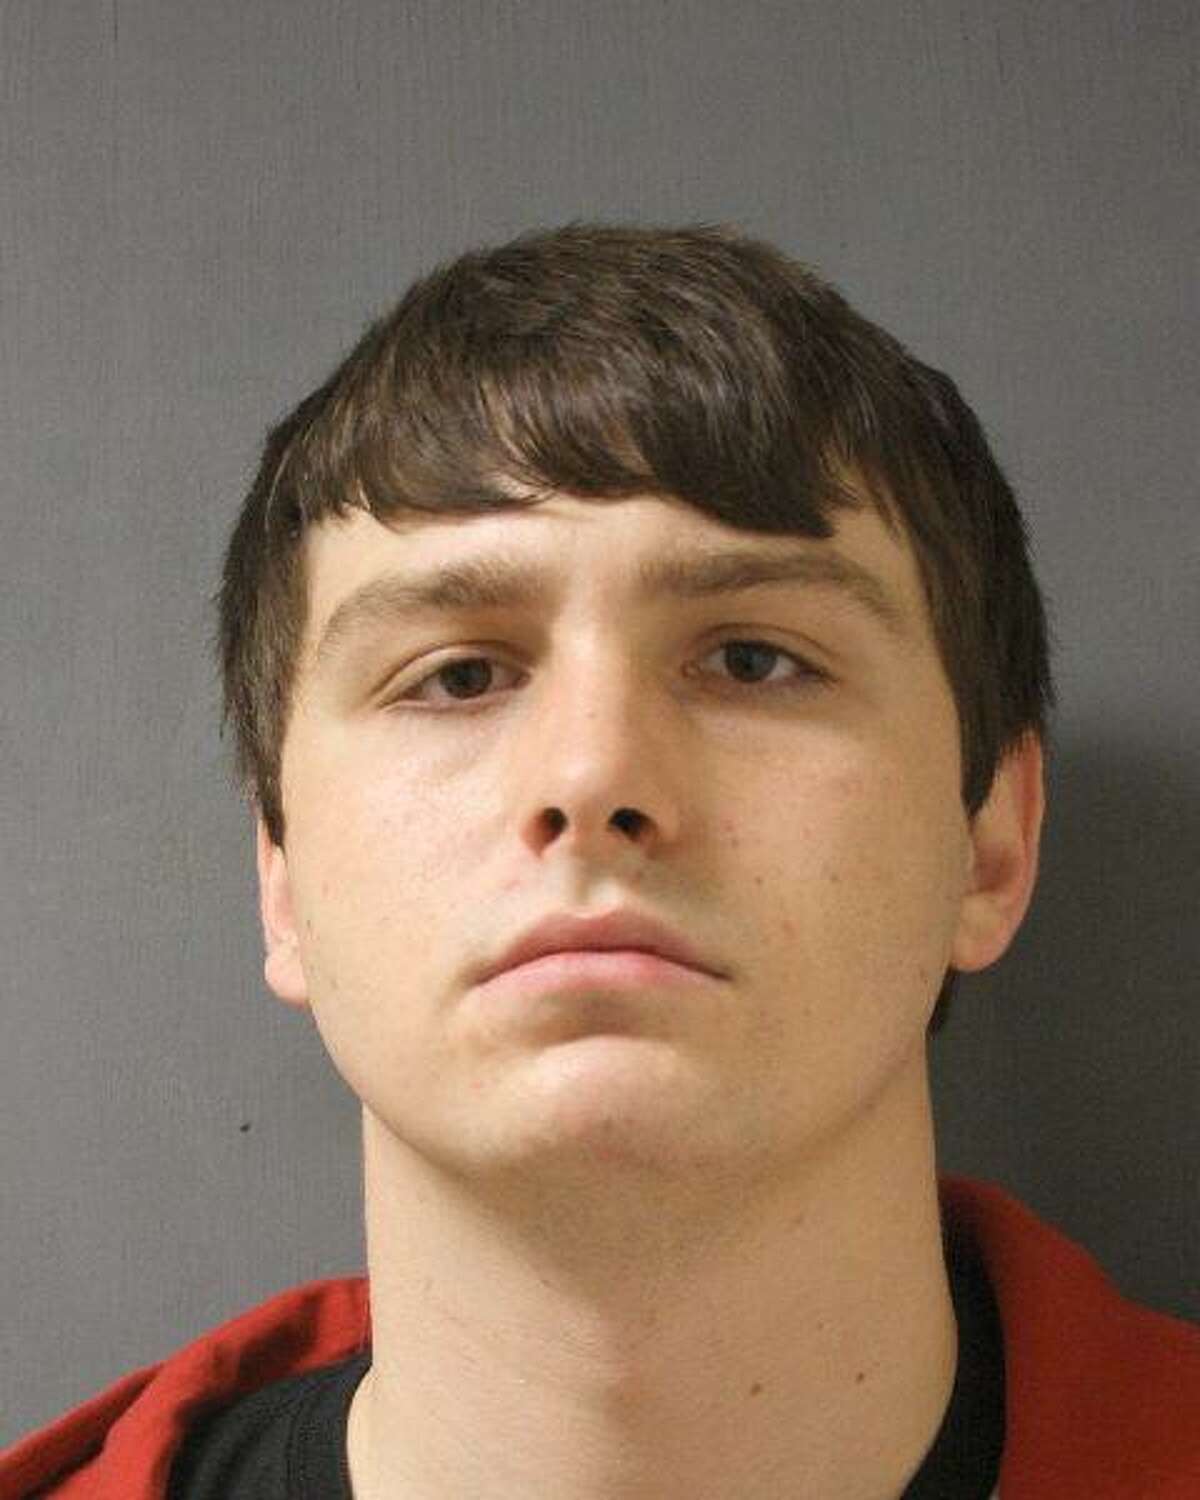 Brandon Lee Hicks, 21, has been charged with deadly conduct by shooting a firearm, a felony. He is accused of shooting a gun out the window of a moving car on April 6, 2018. The incident was brought to law enforcement's attention after it was posted on Snapchat.